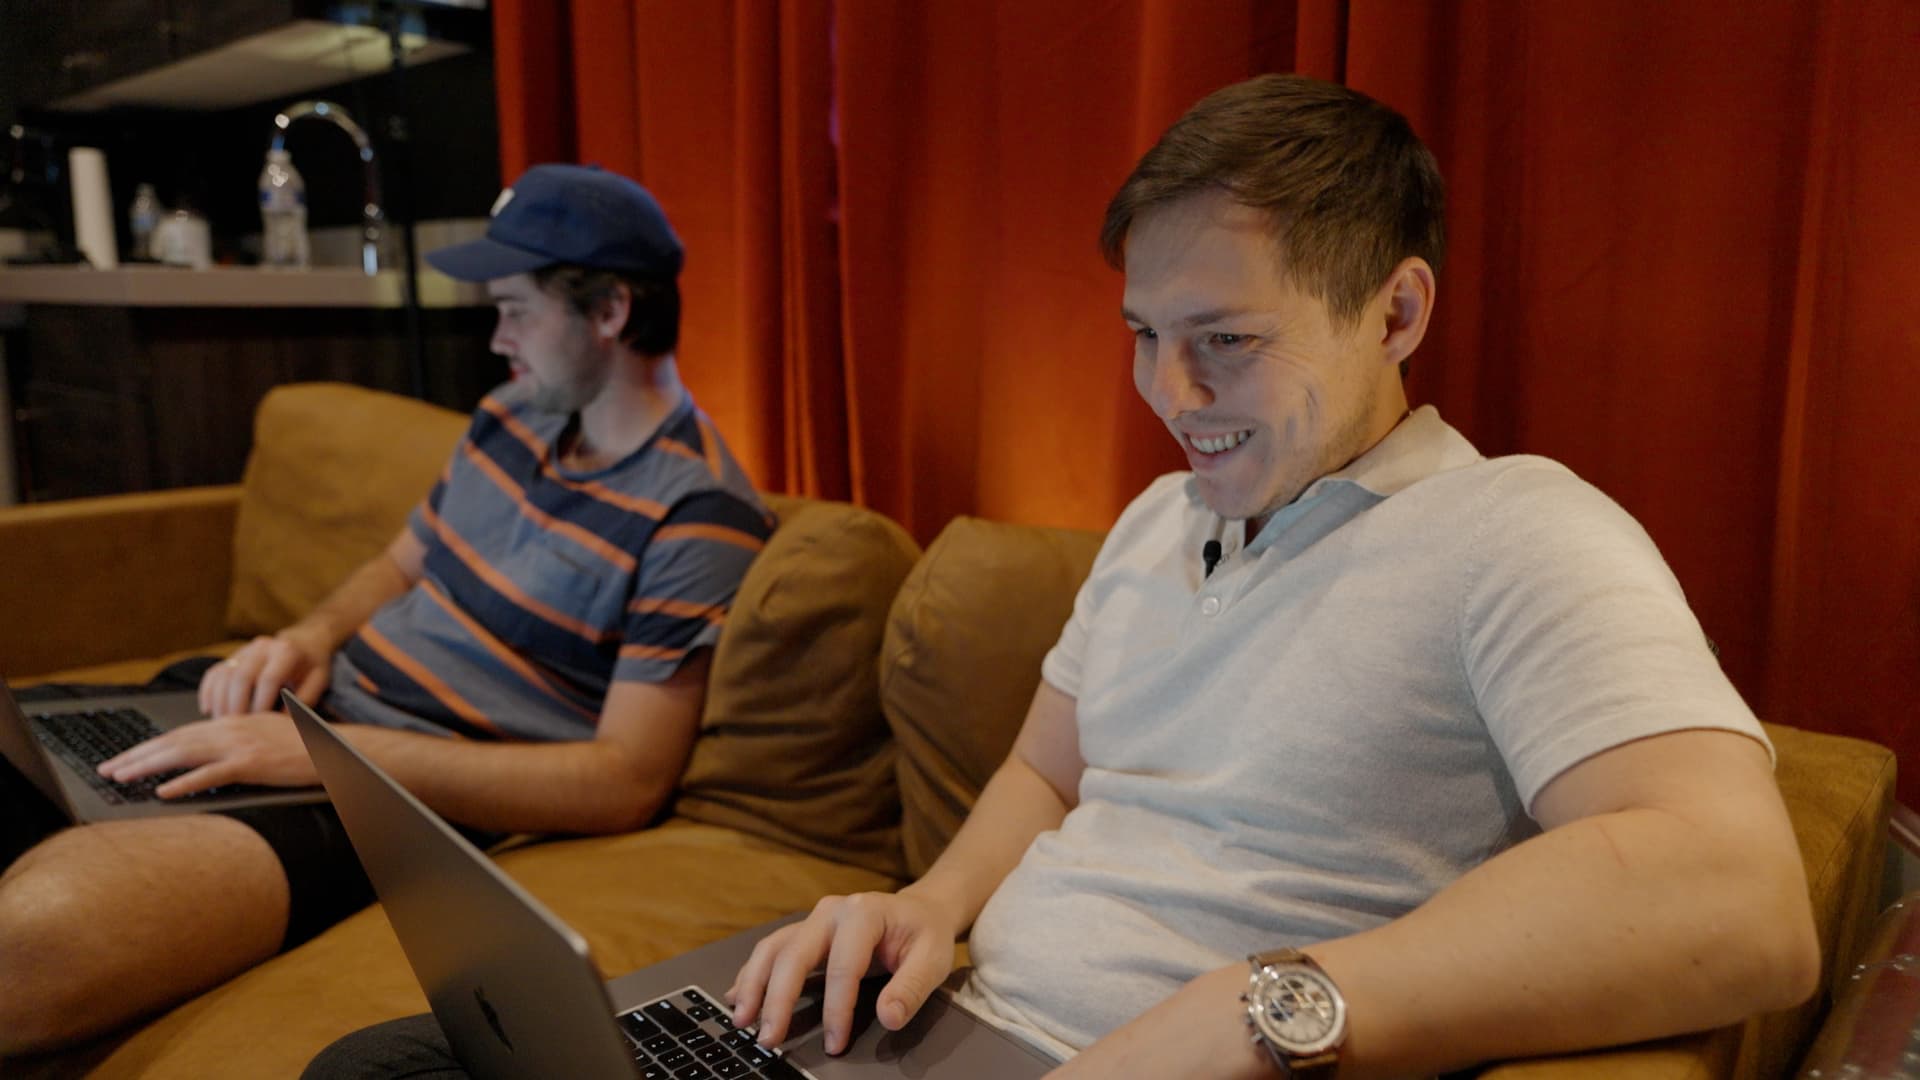 Stephan working with his editor, Jack, who also lives with him.